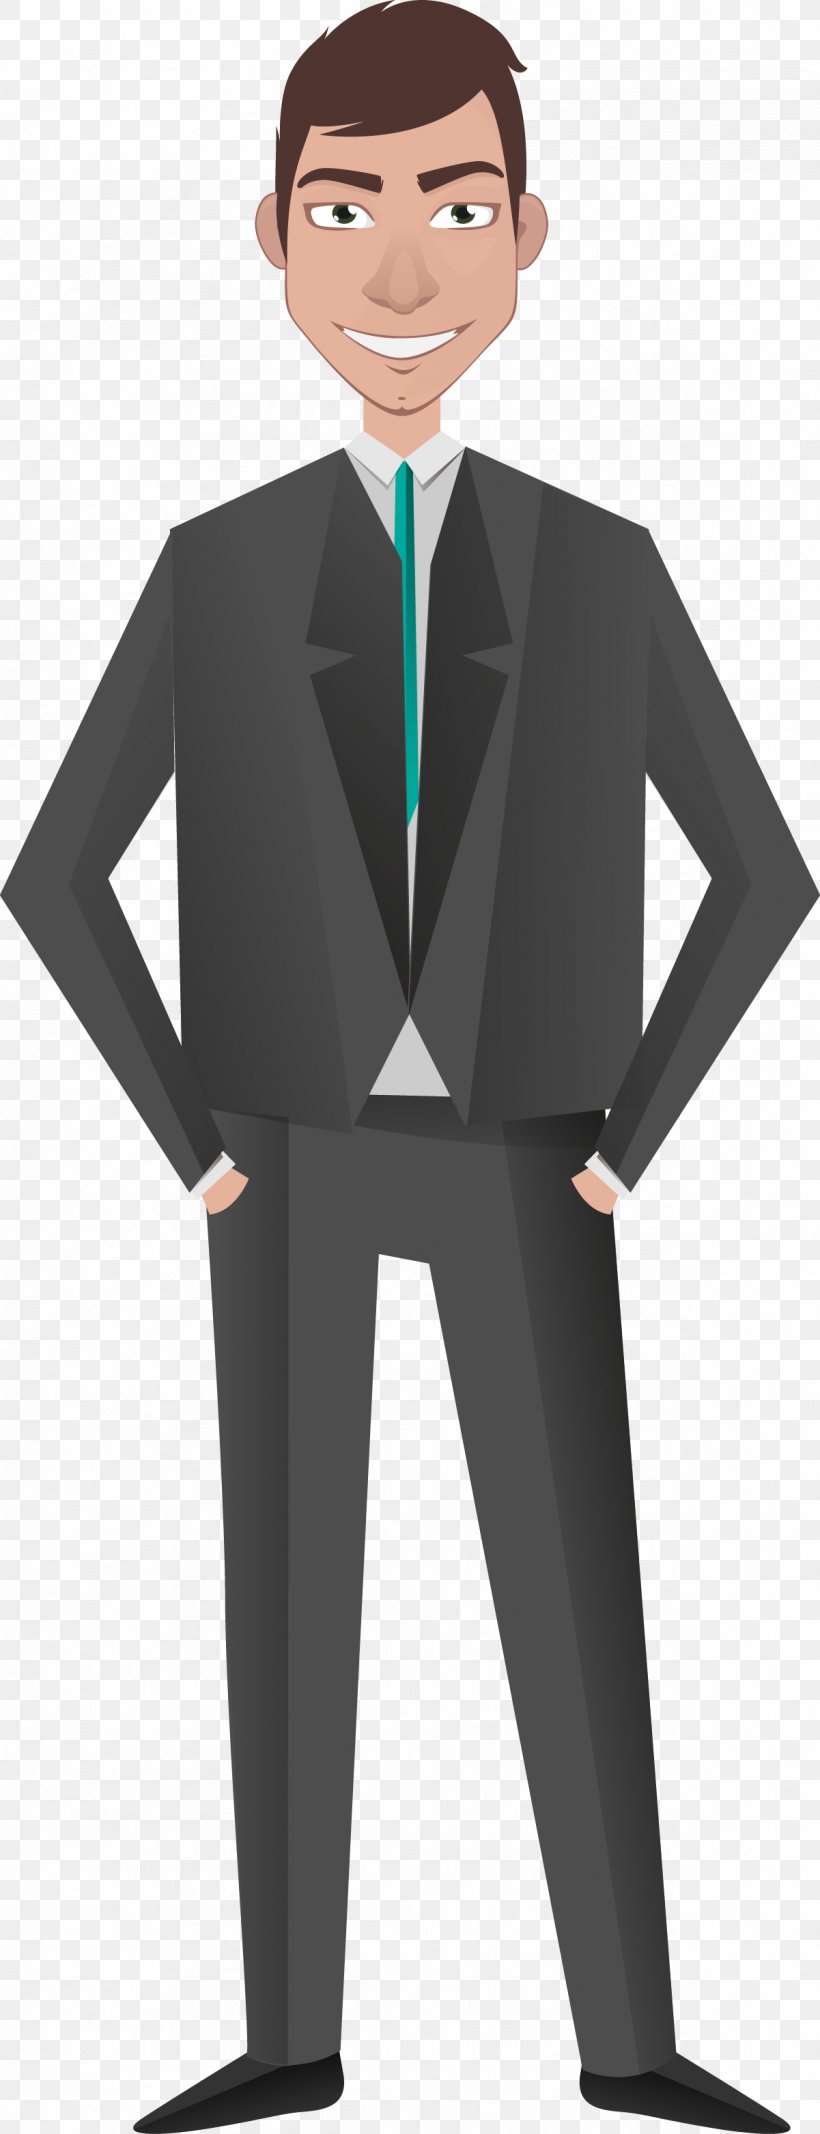 Character Cartoon Illustration, PNG, 1201x3126px, Character, Artworks, Business, Business Executive, Businessperson Download Free